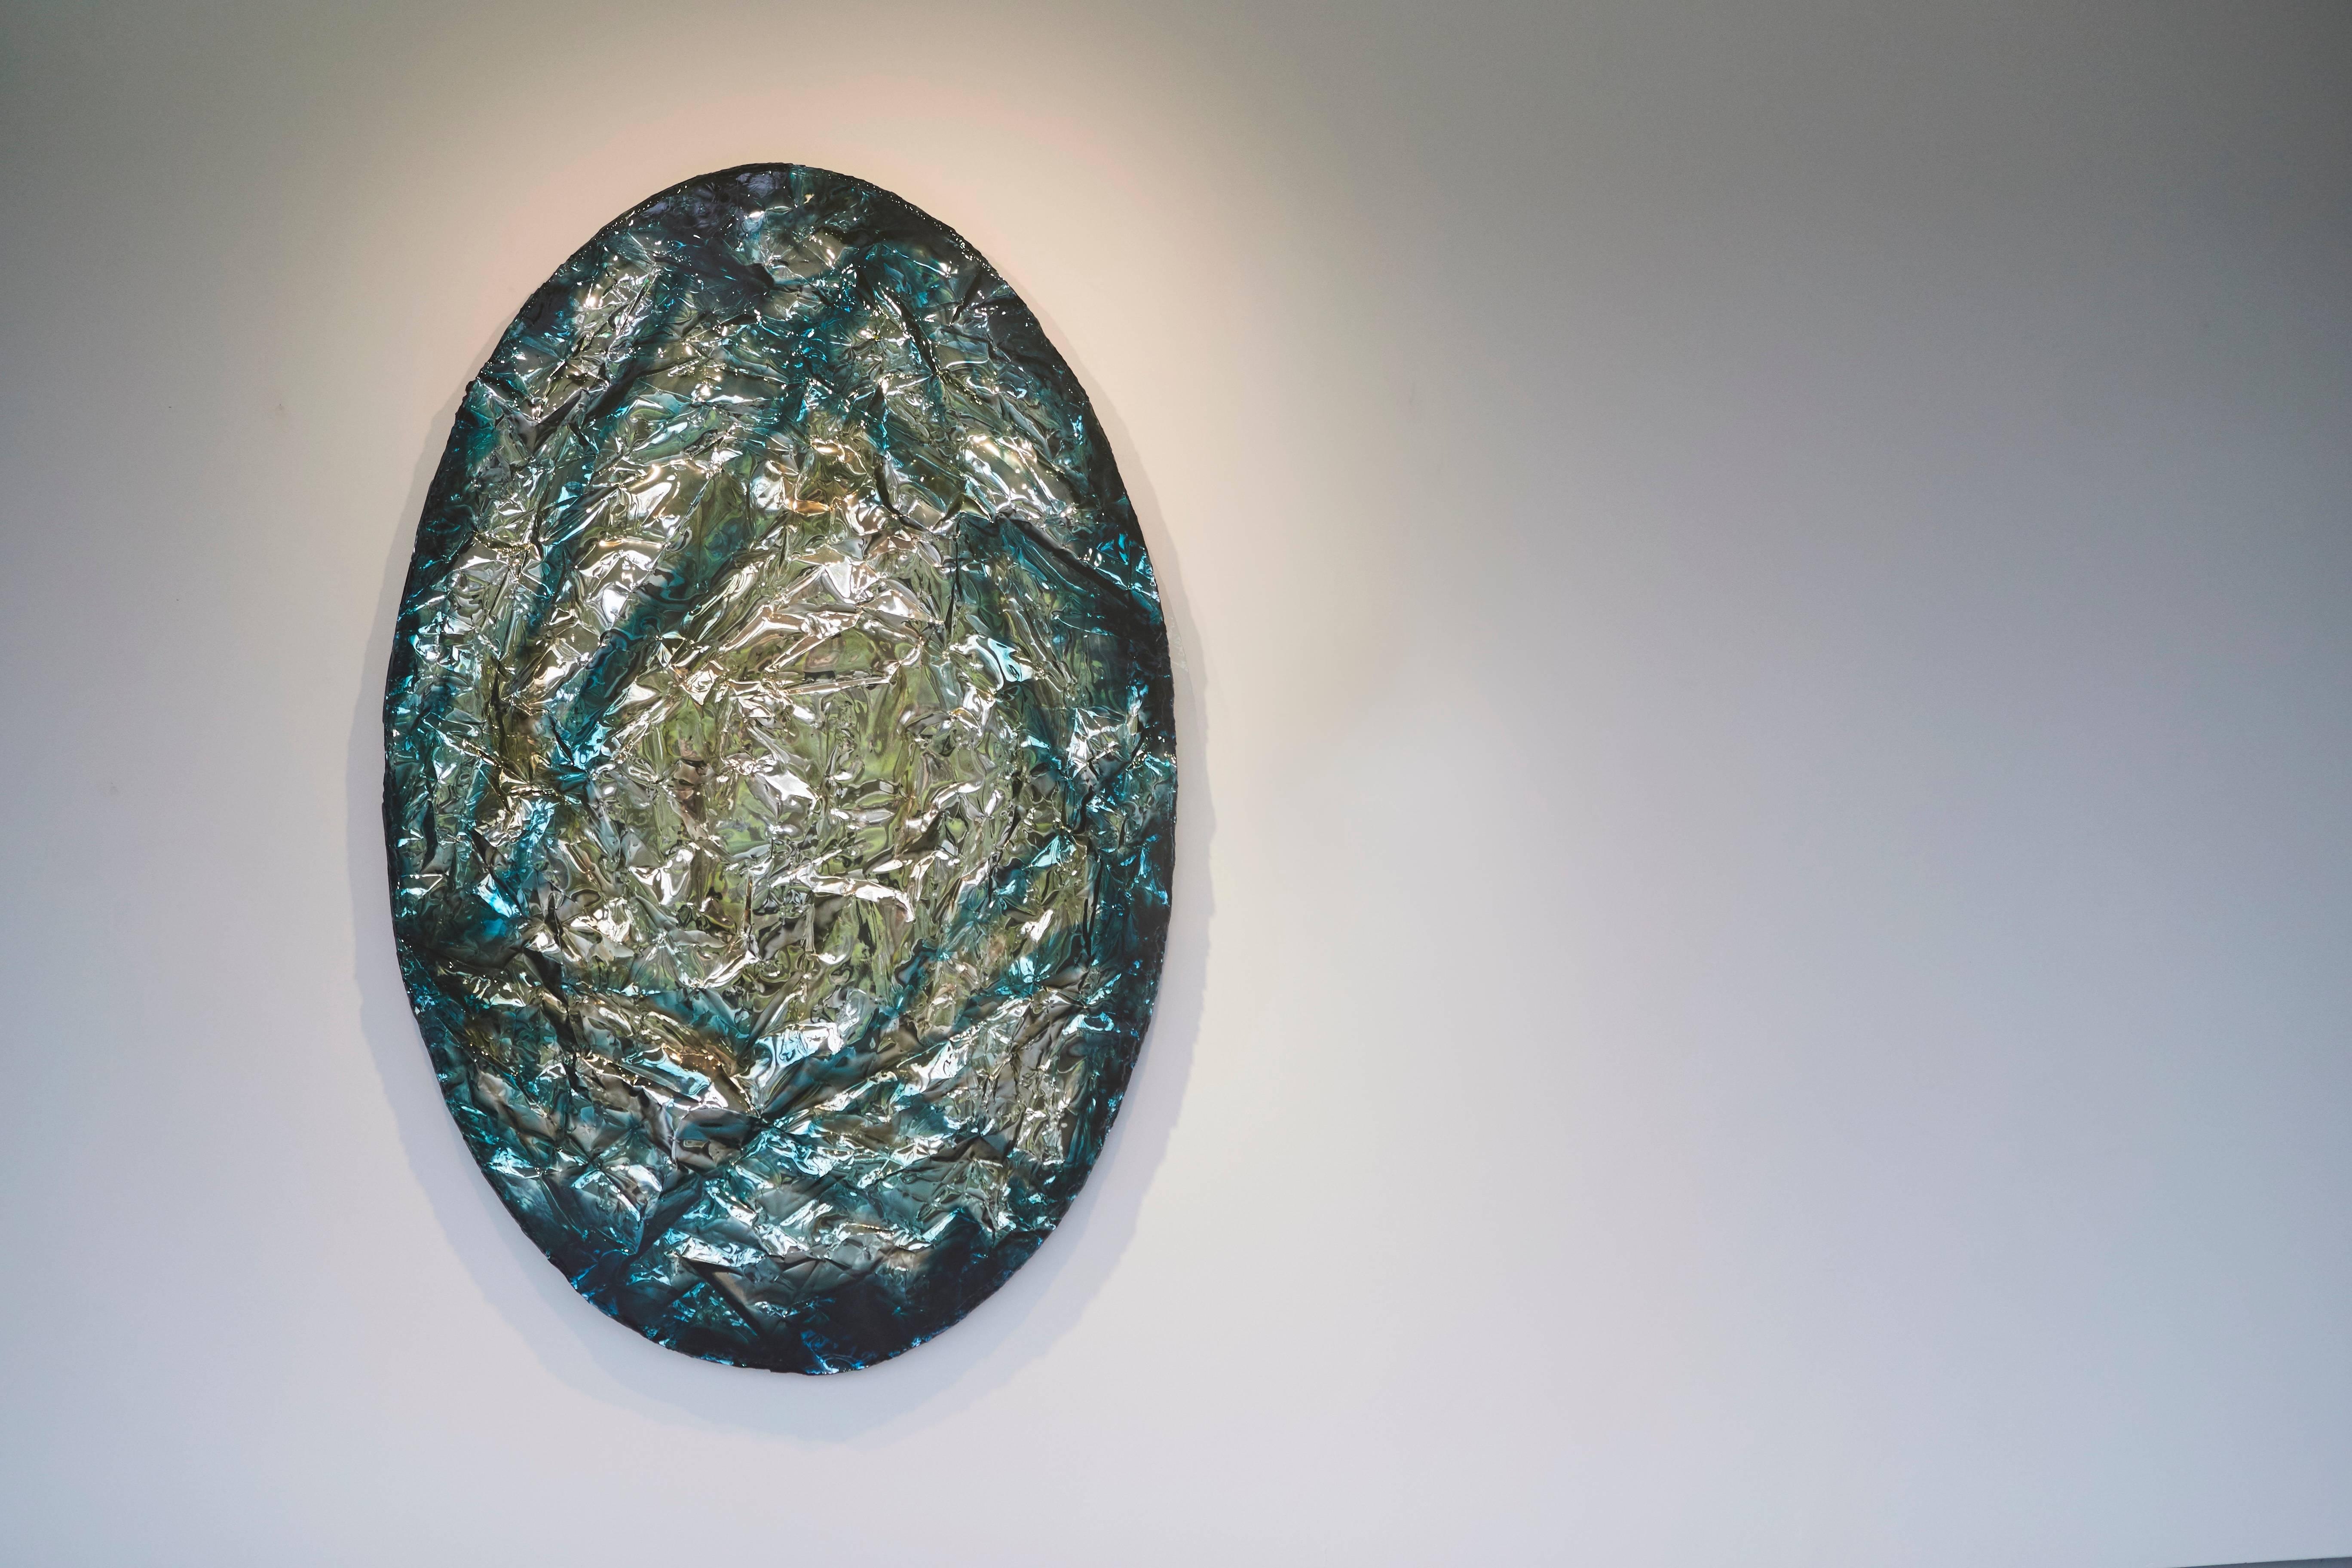 Hand-Crafted Wall Art in Ocean Green and Gold, 'Limber Gem' by Pleunie Buyink For Sale